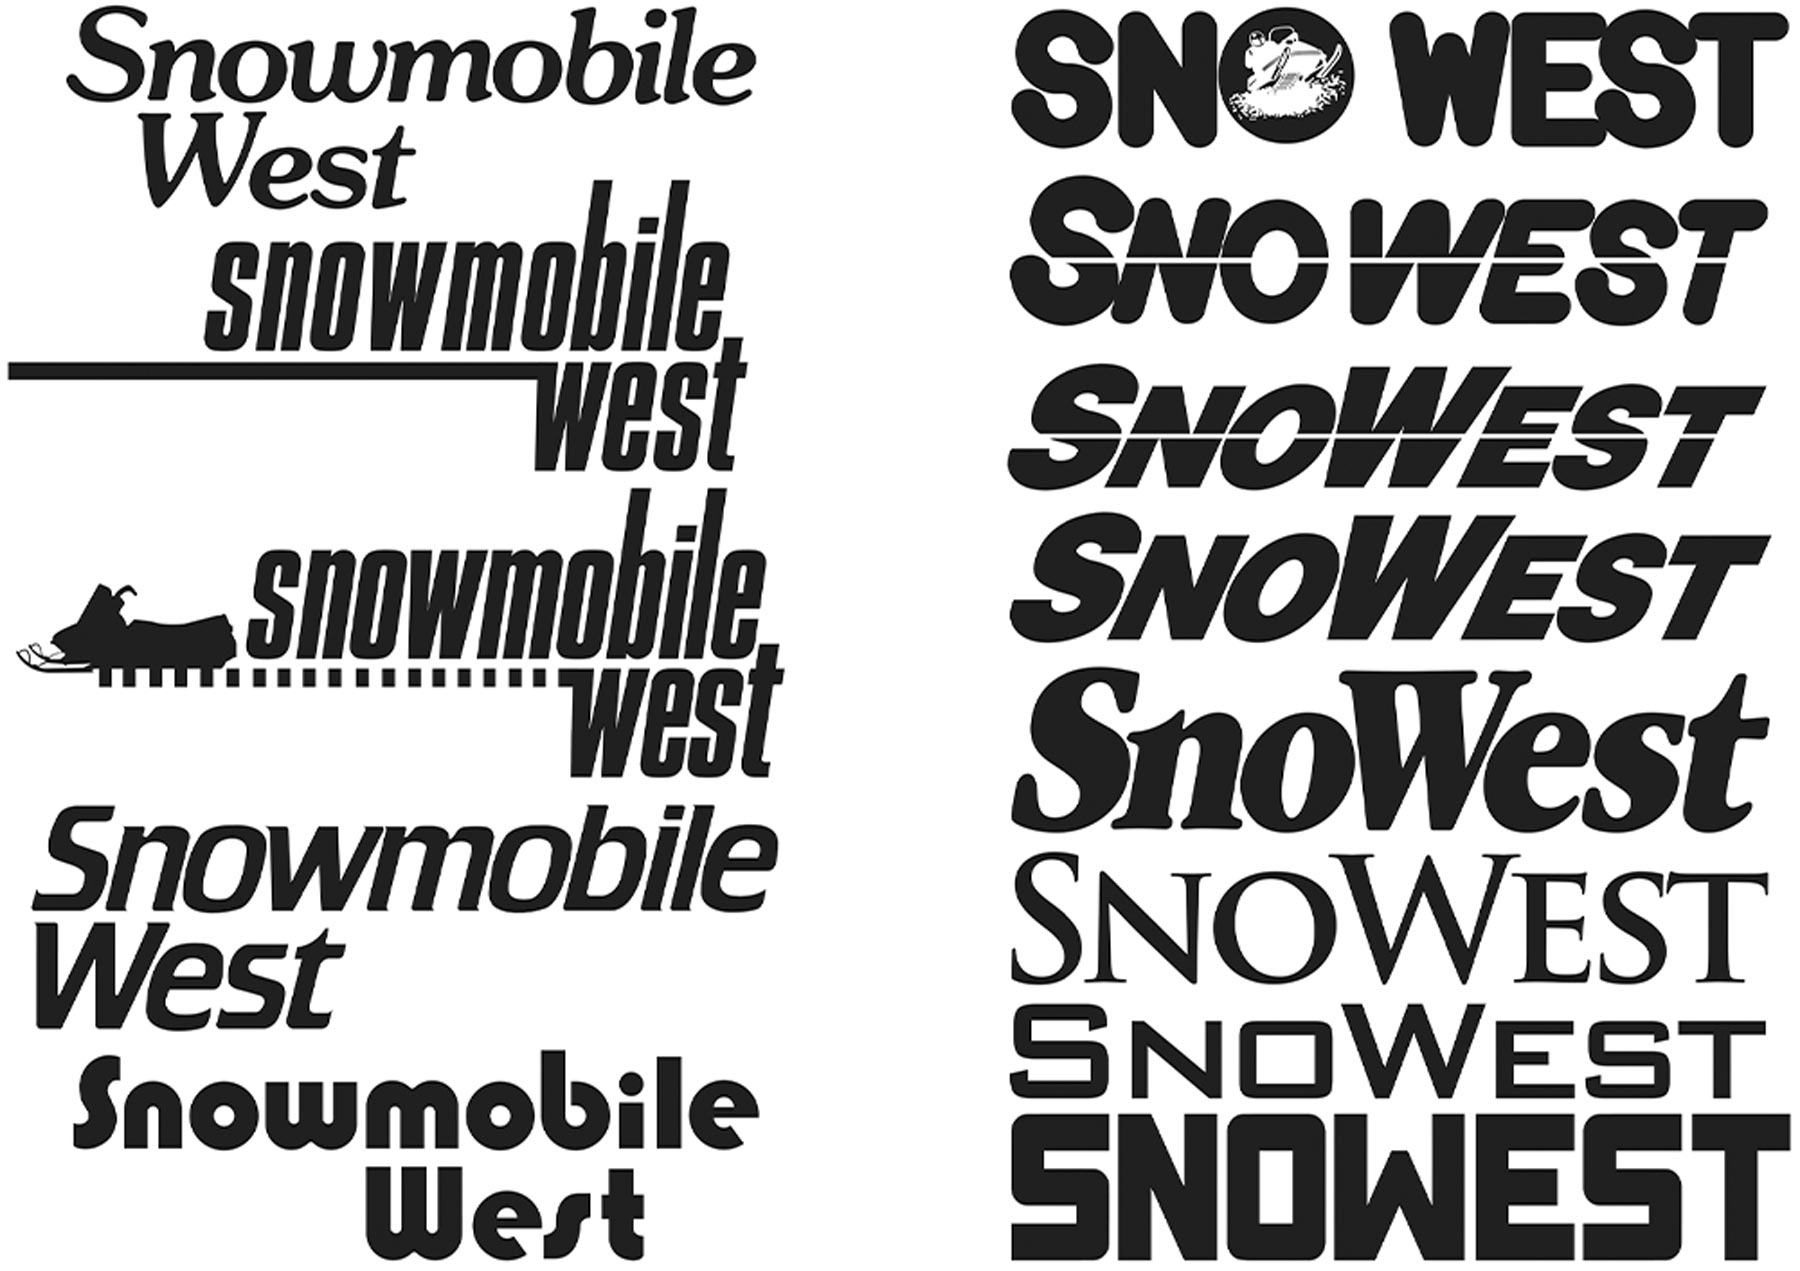 Snowmobile West past logo iterations 